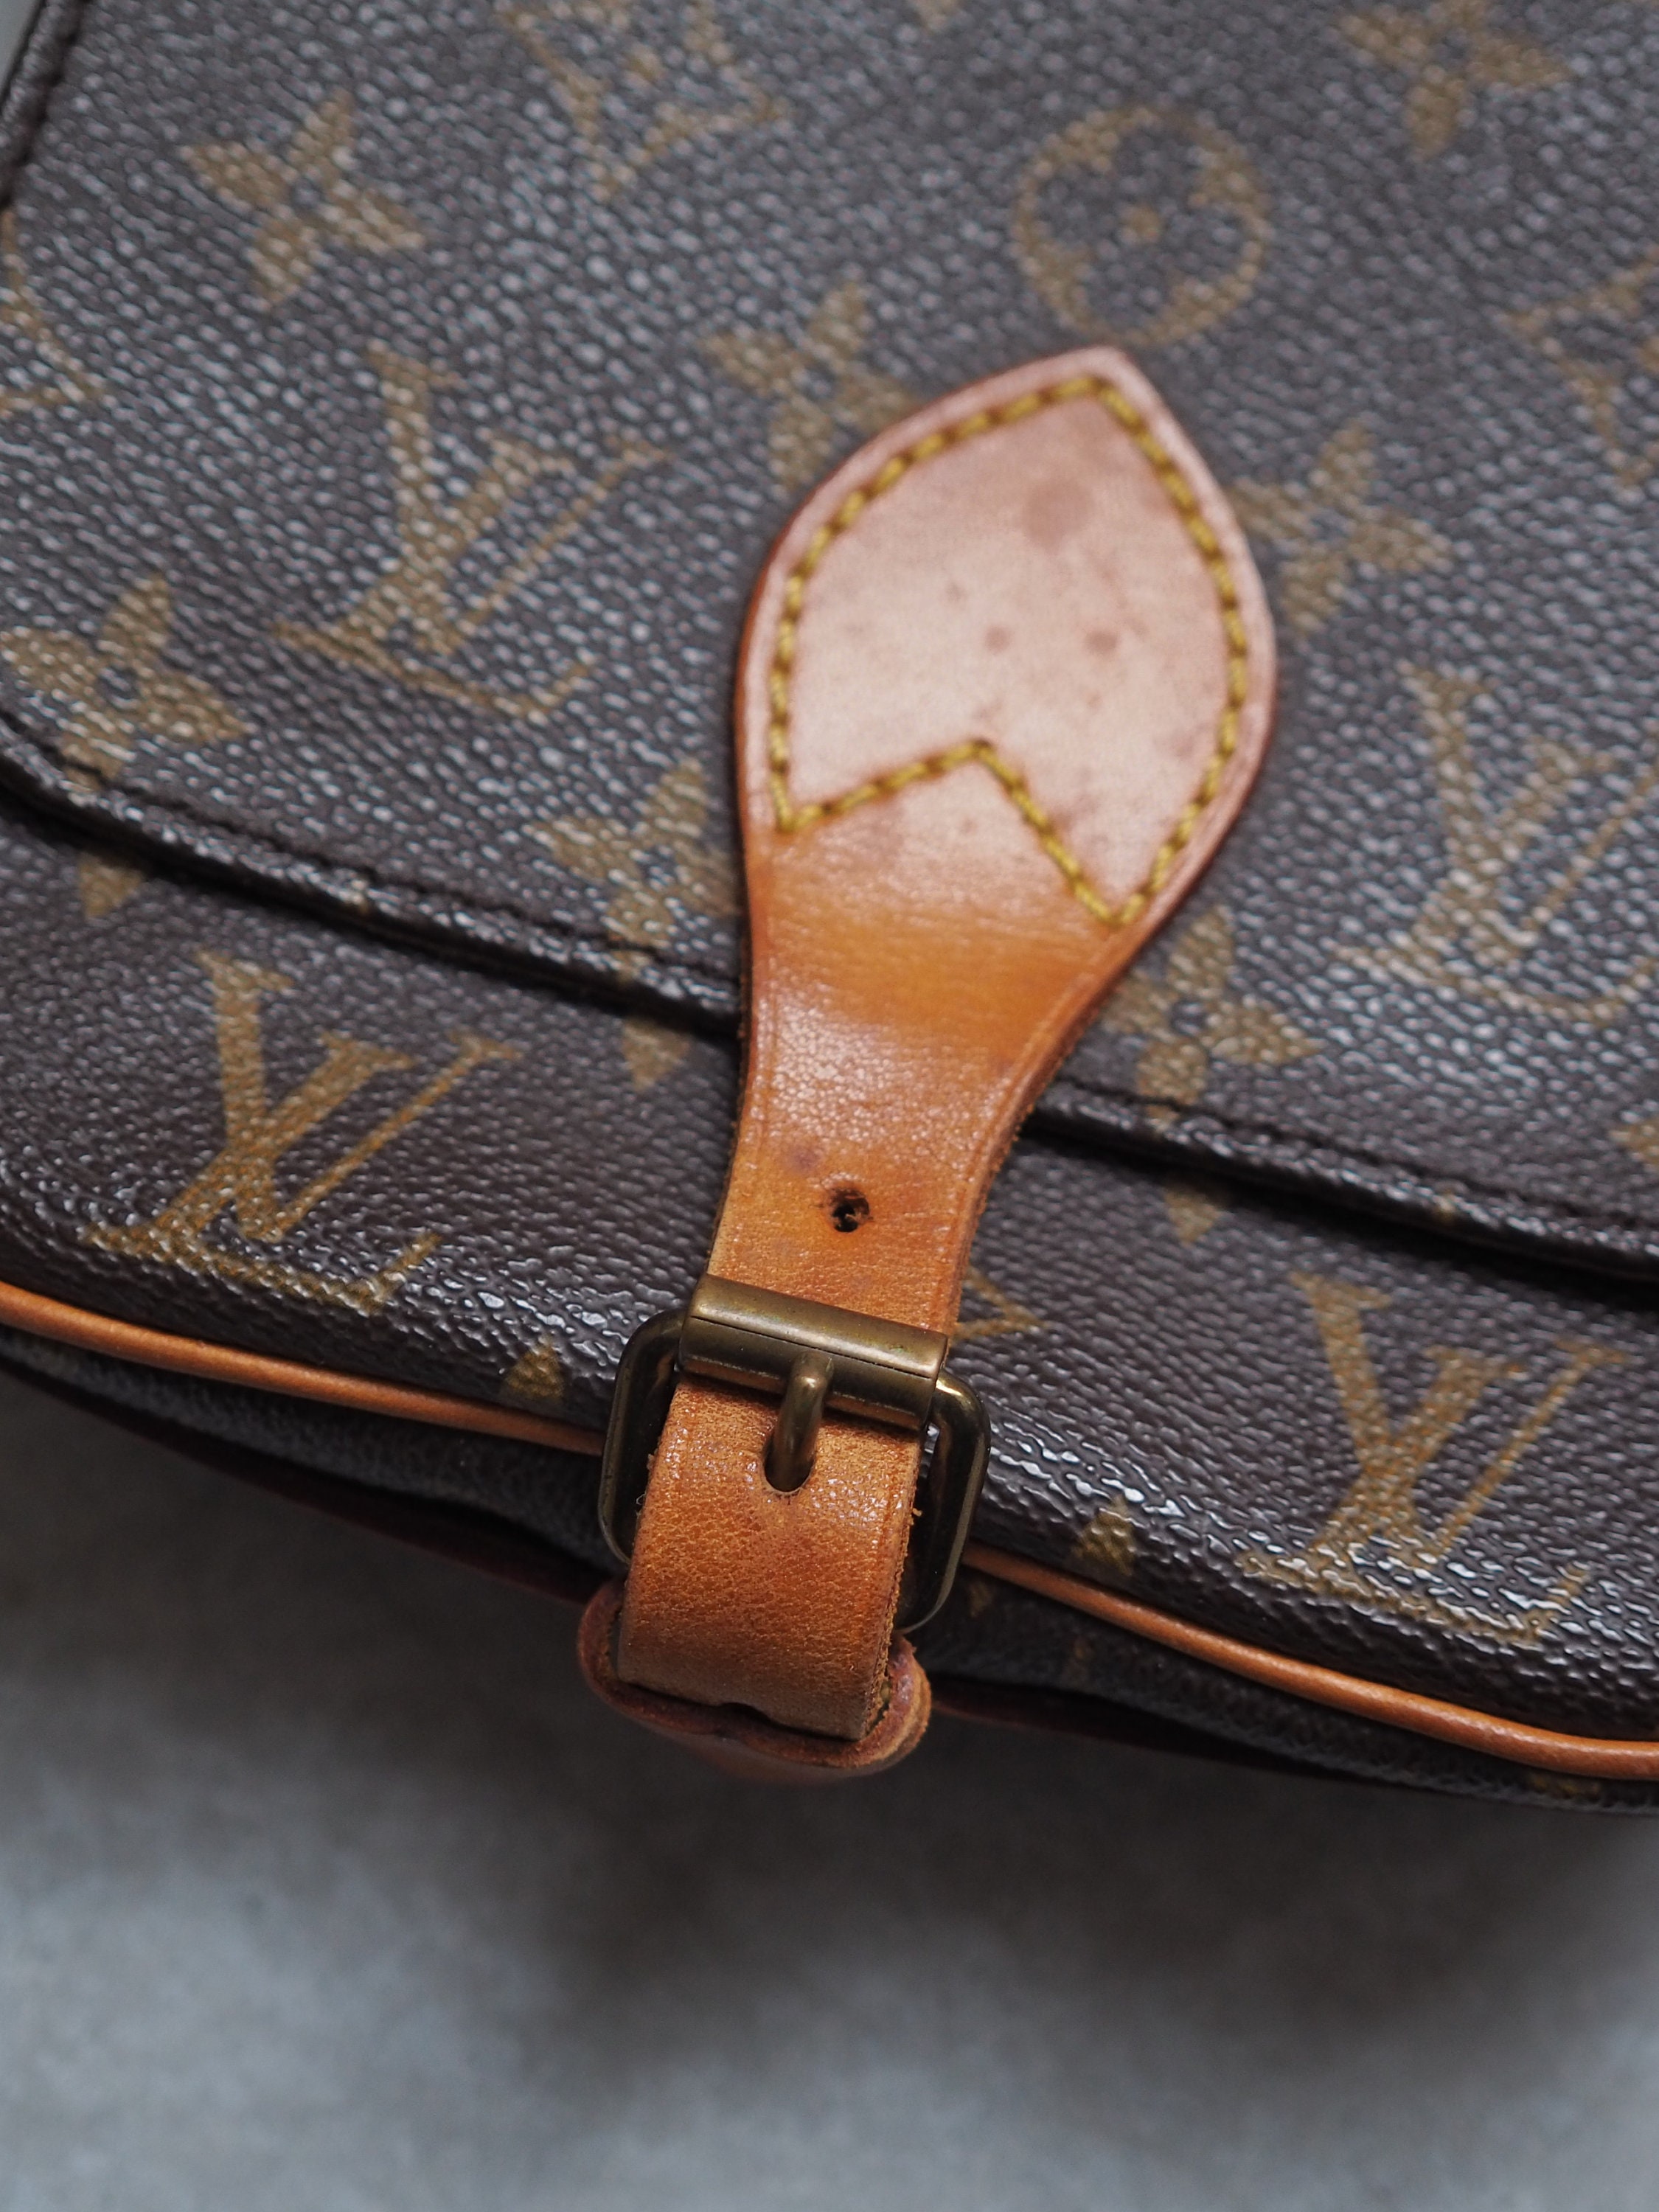 Shop for Louis Vuitton Monogram Canvas Leather Cartouchiere PM Shoulder Bag  - Shipped from USA